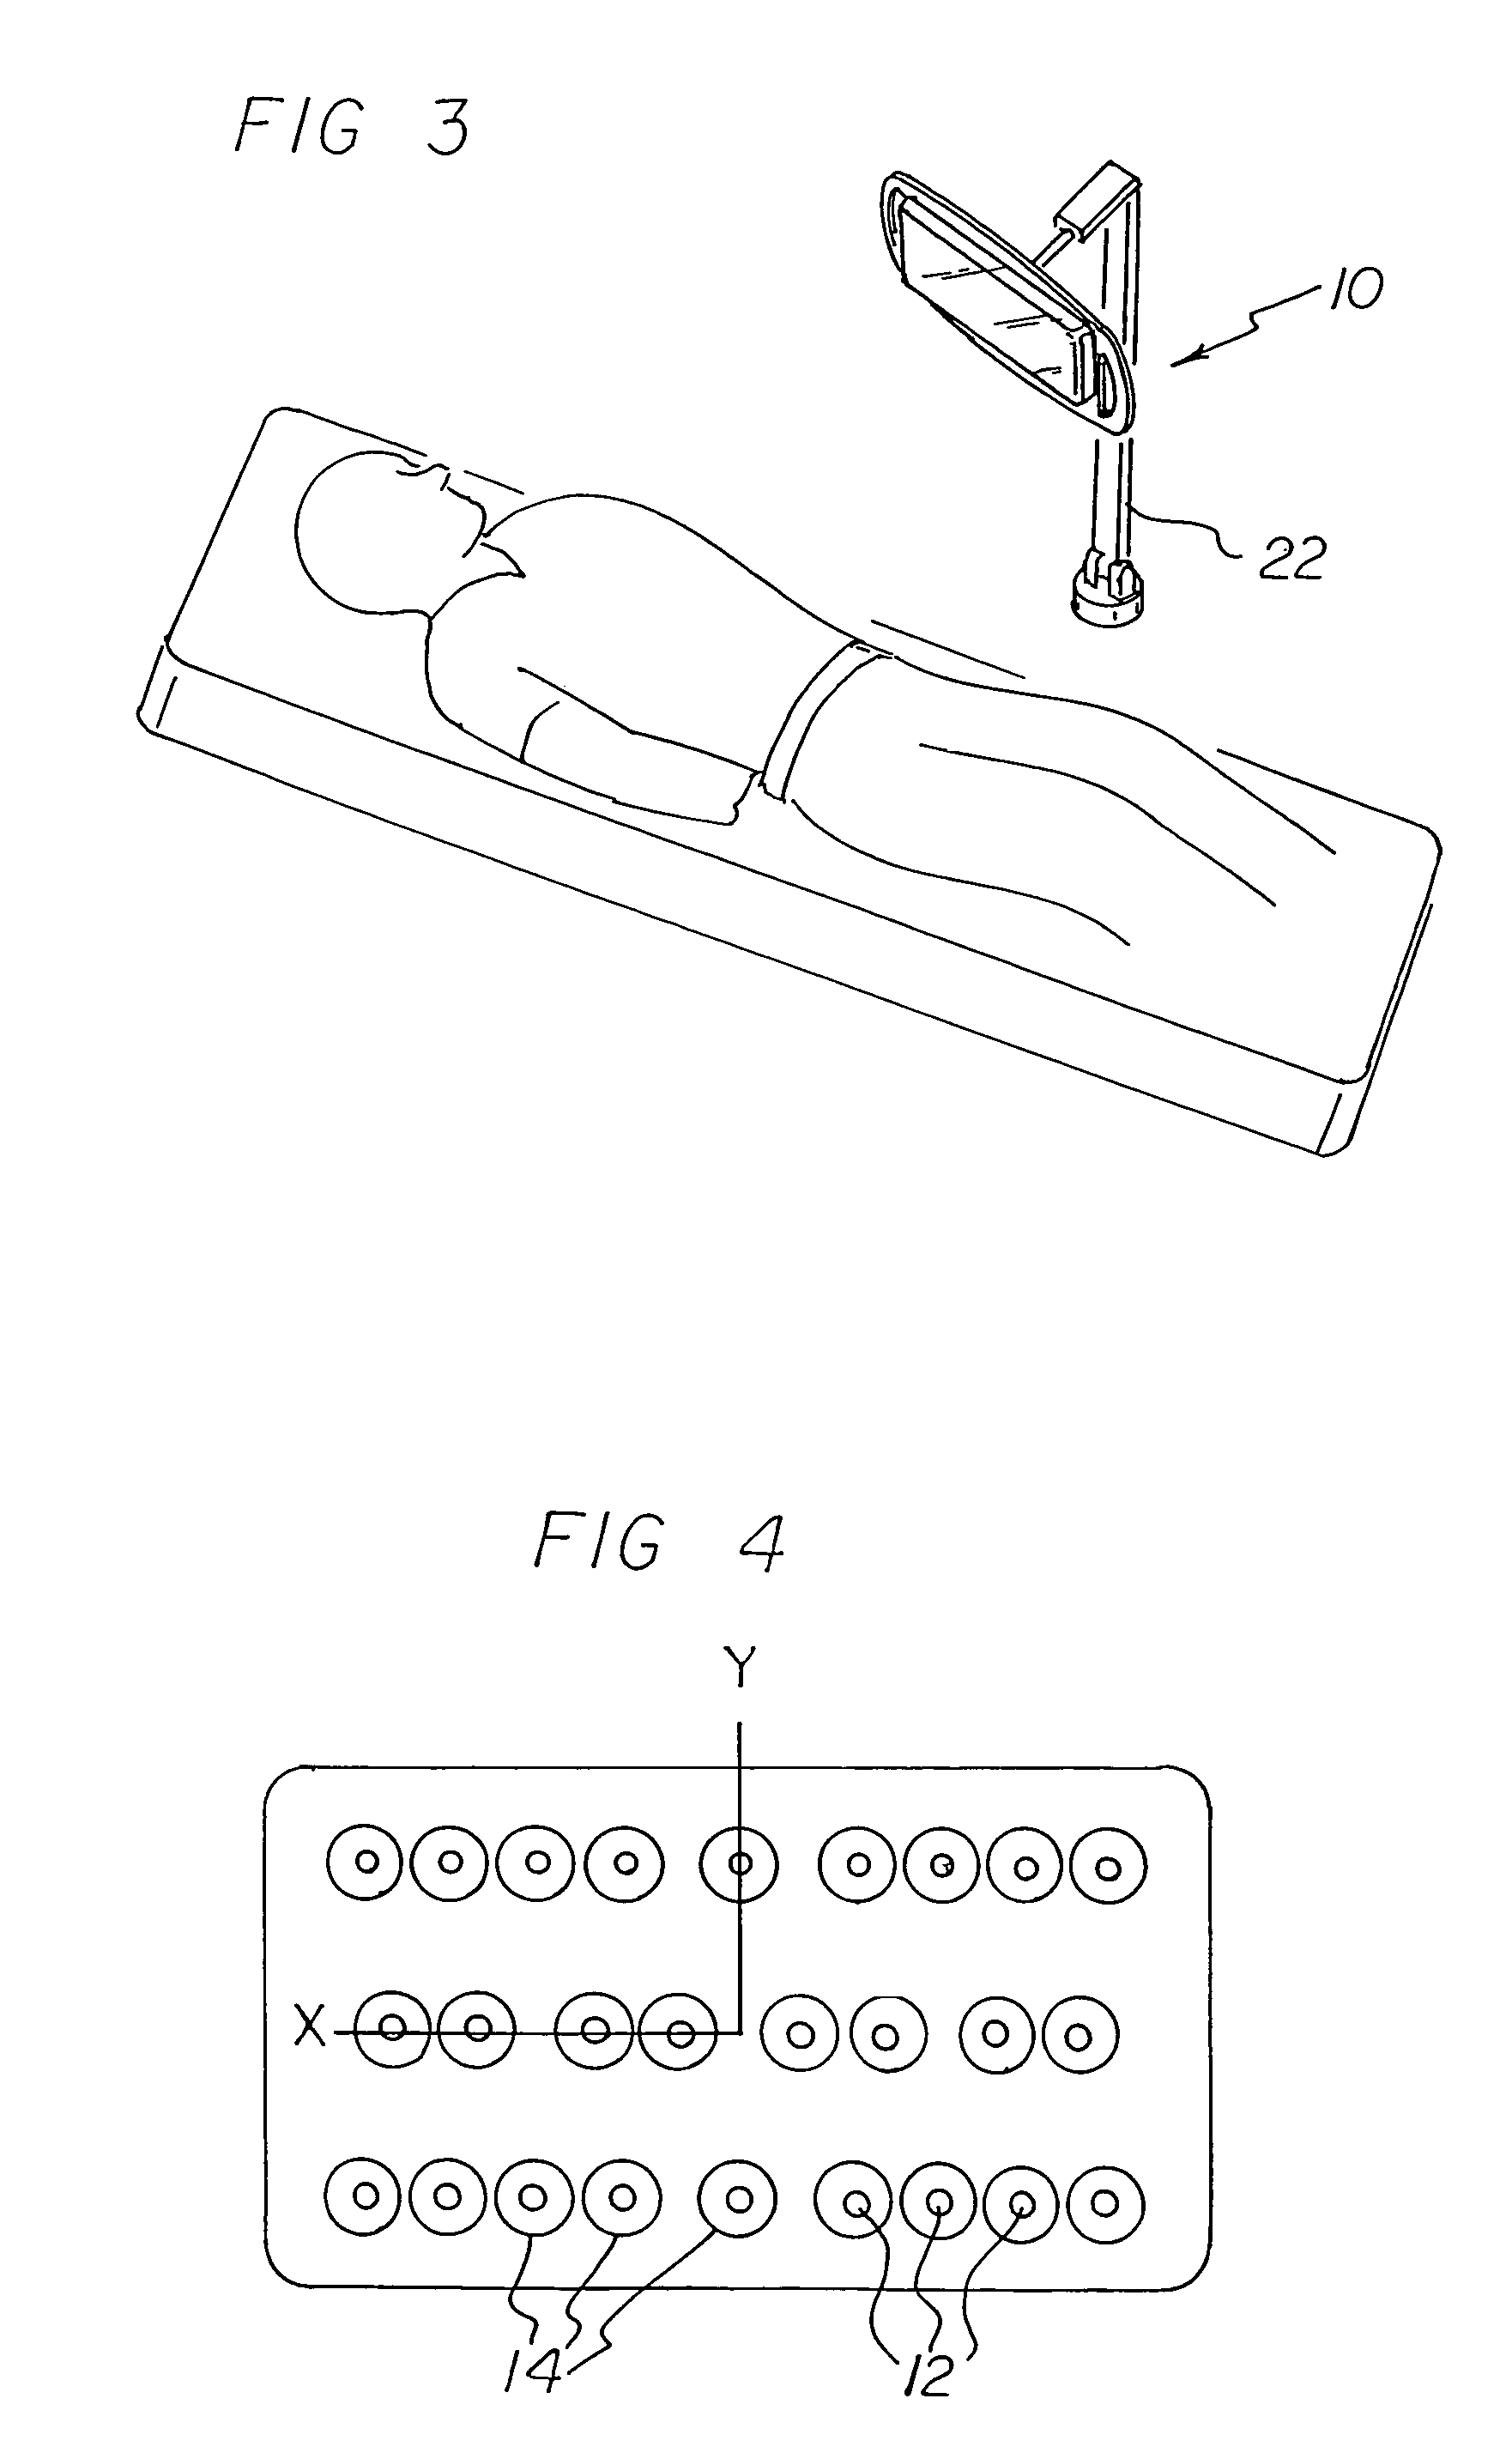 Light emitting diode operating and examination light system